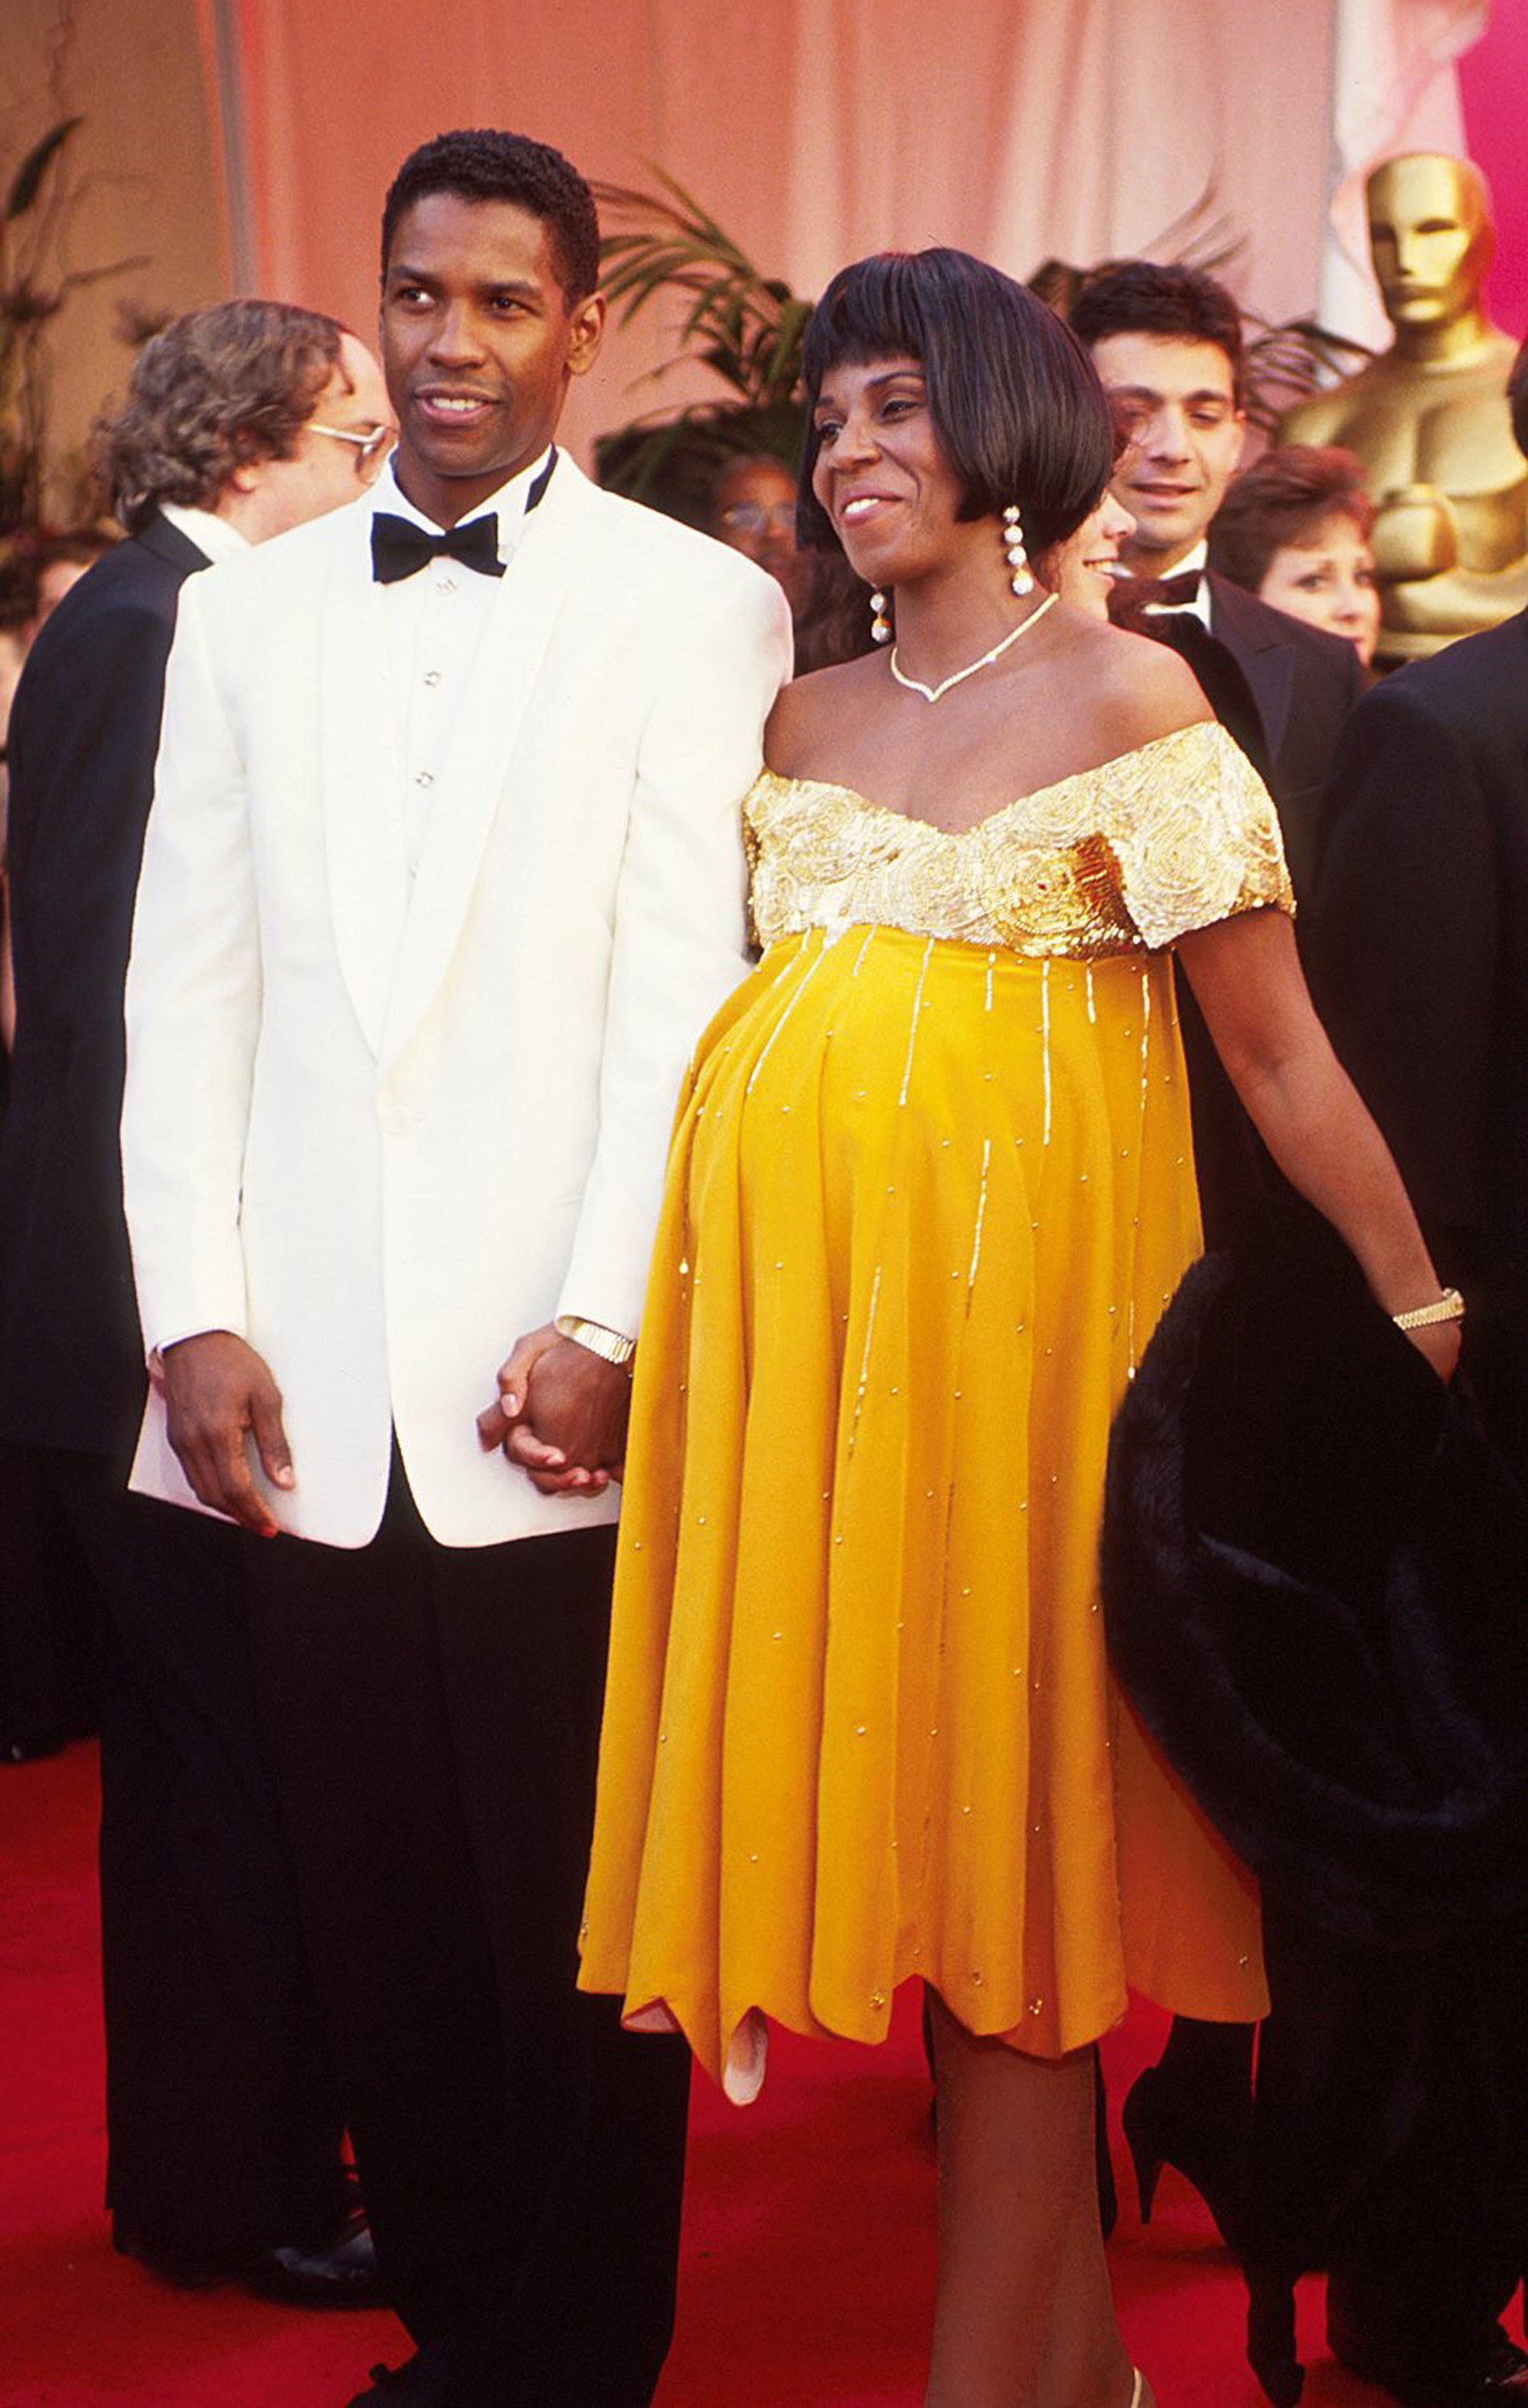 Washington in a white tuxedo jacket and his wife wearing a yellow dress